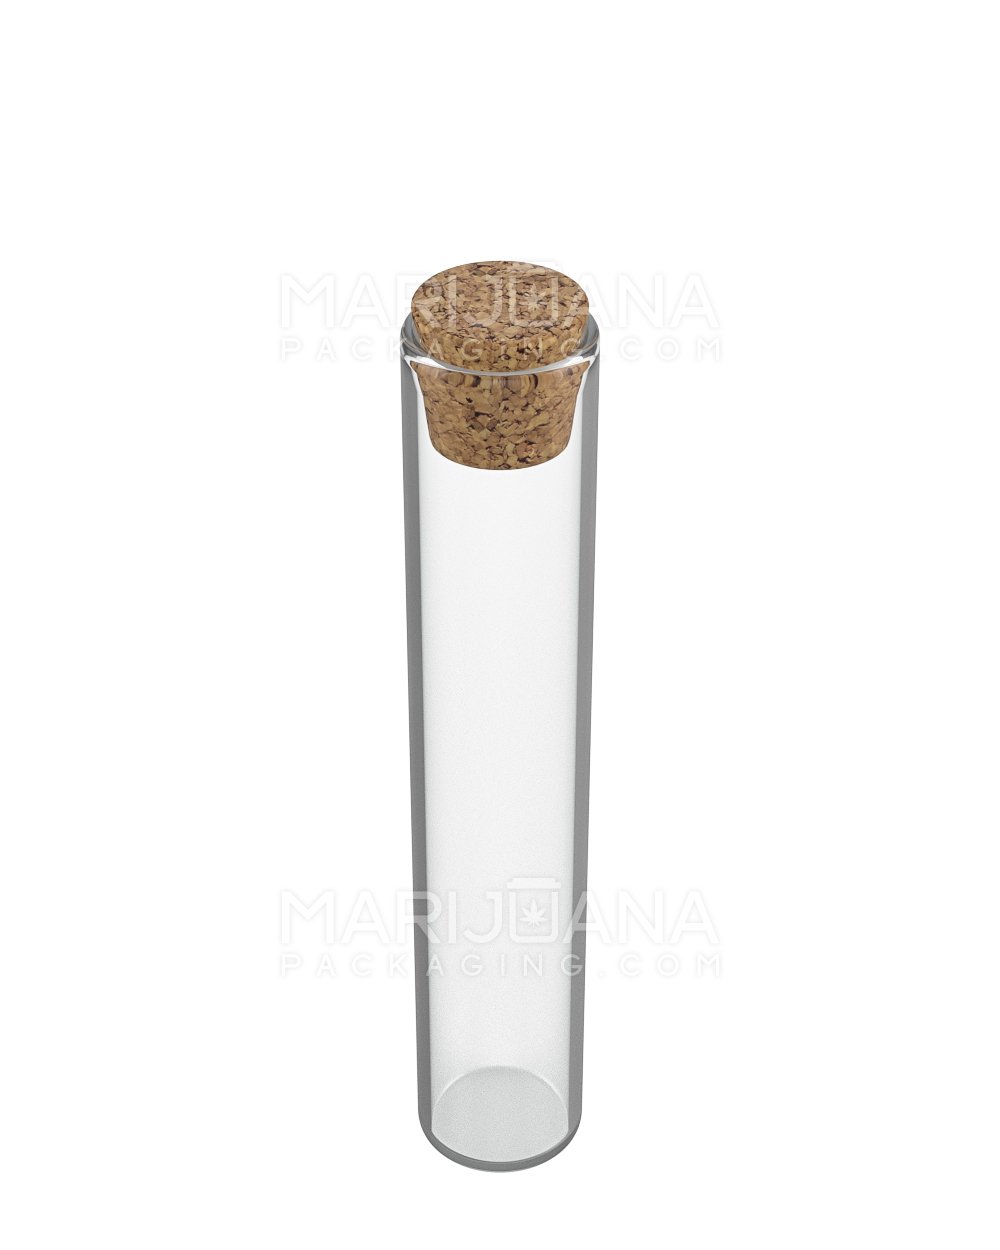 Glass Pre-Roll Tube with Cork Top | 120mm - Clear Glass - 640 Count - 5